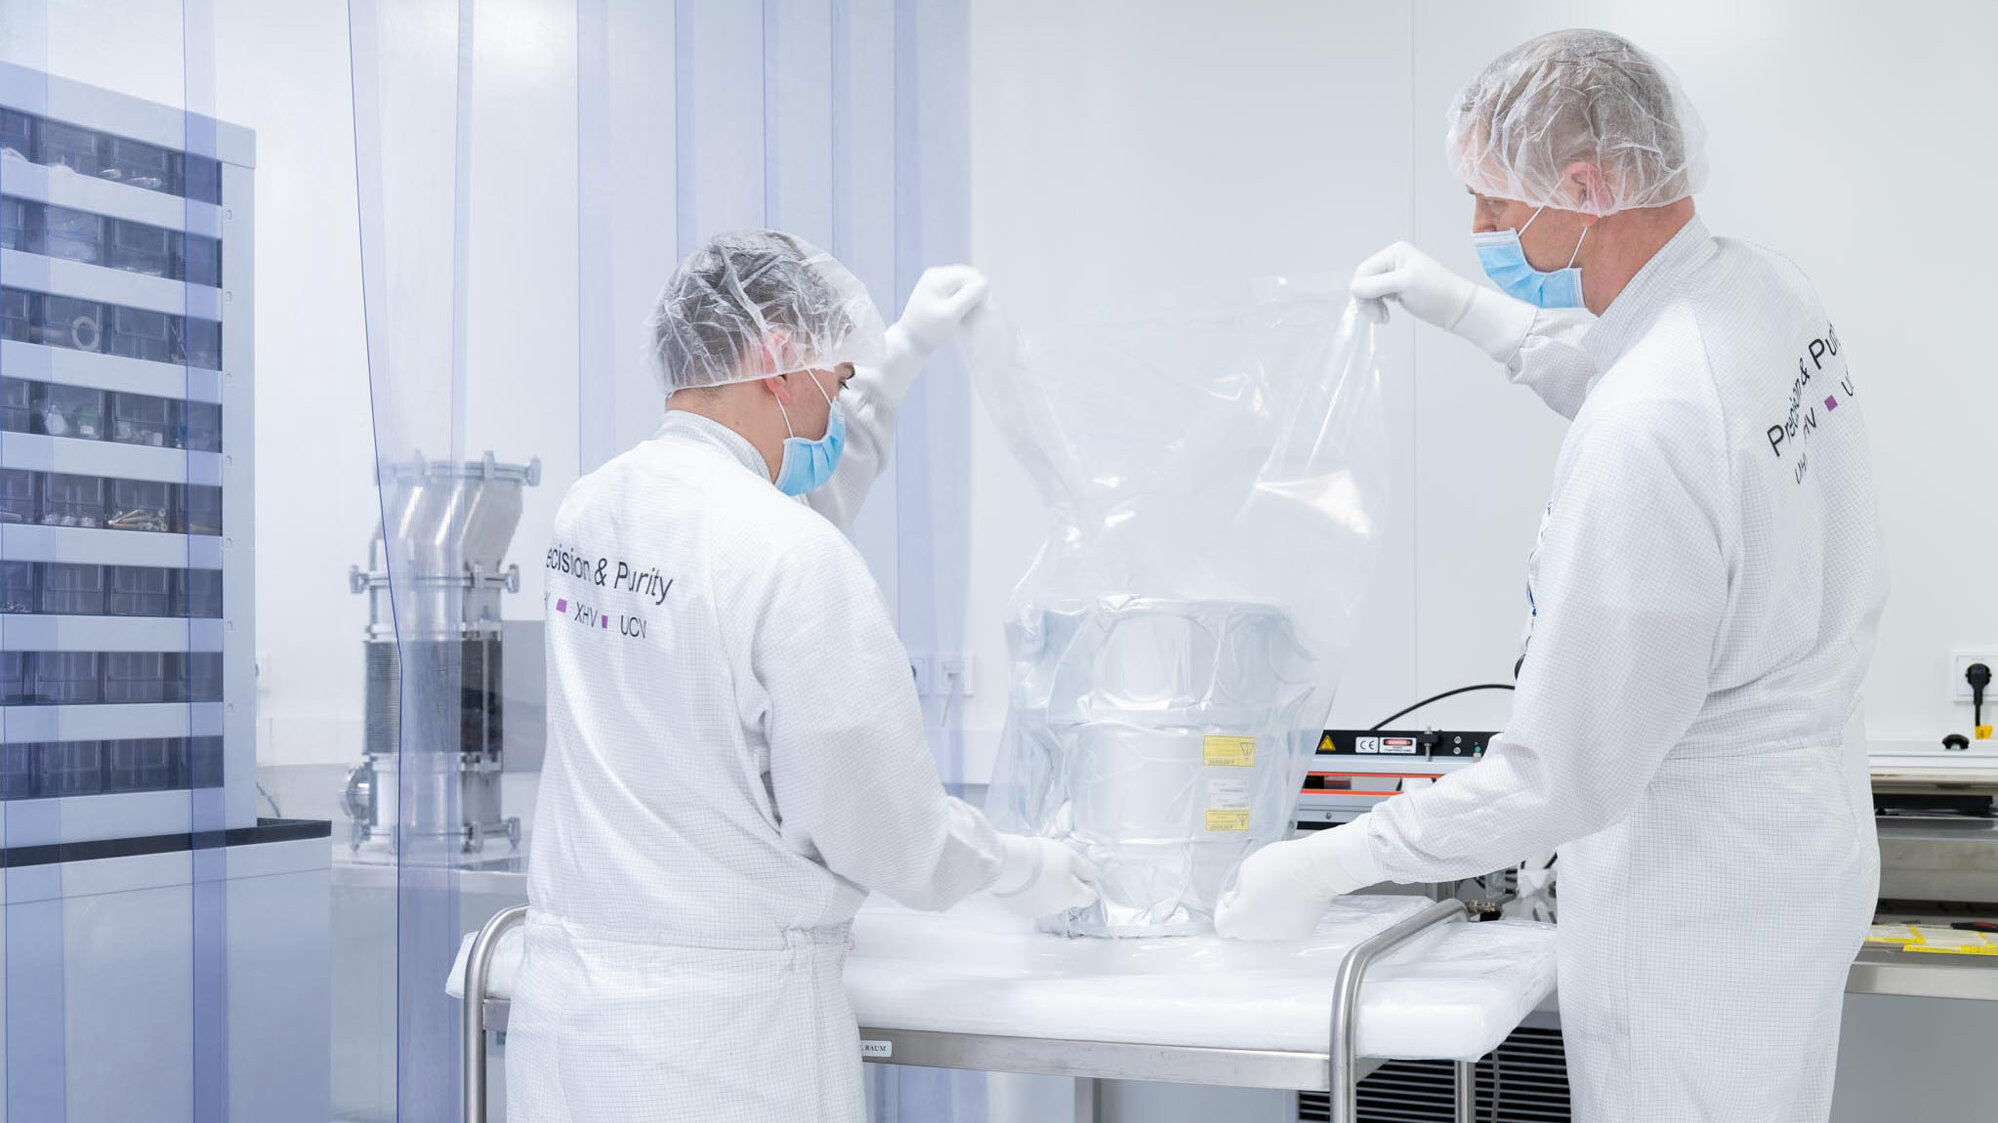 Product Refinement; Two employees pack components under cleanroom conditions